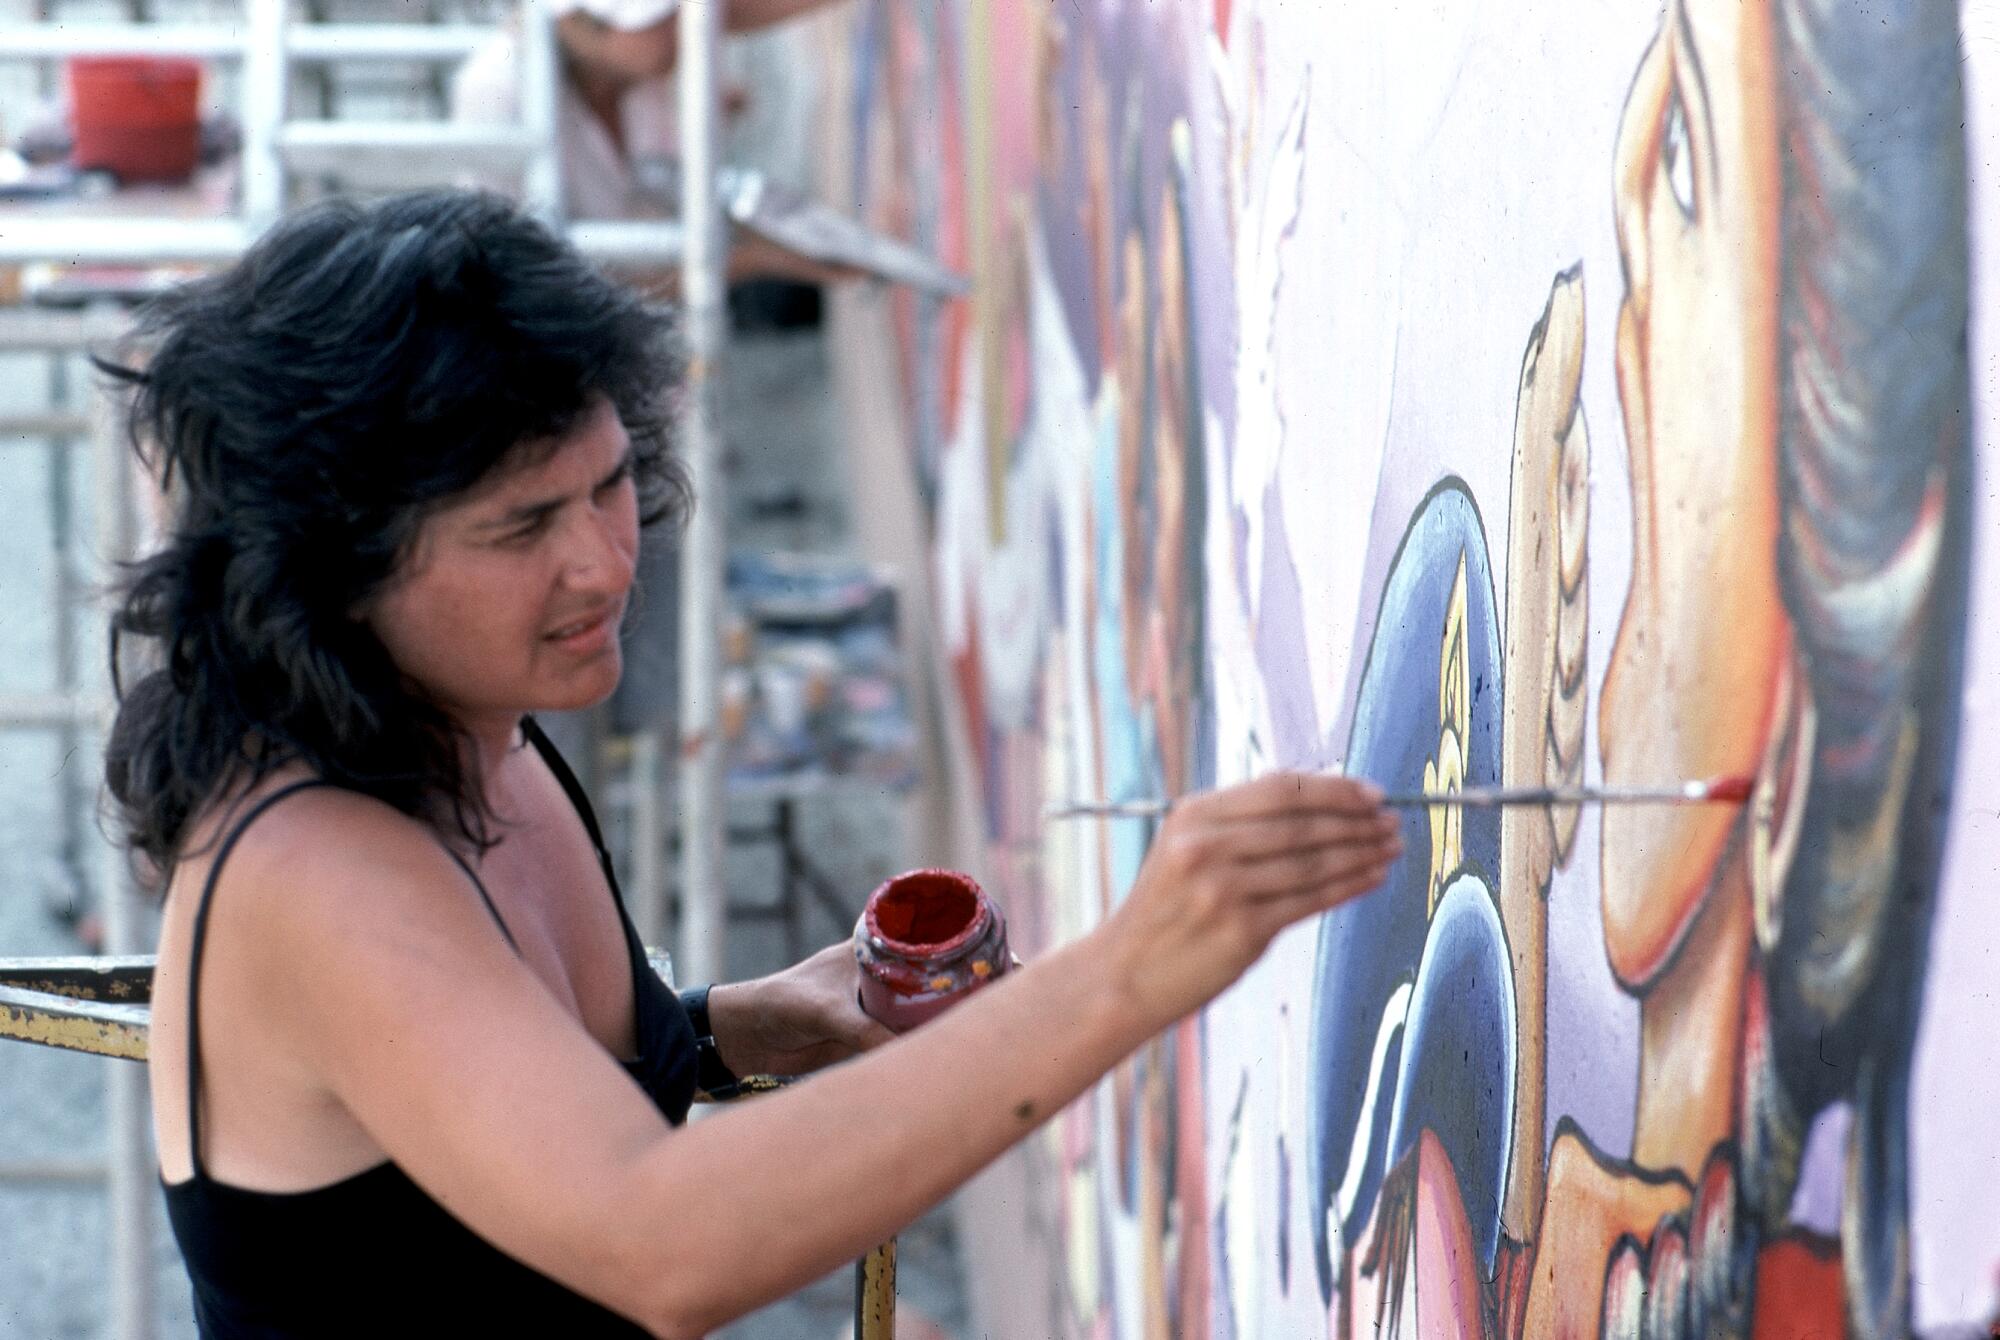 A woman paints on a wall with a thin brush.